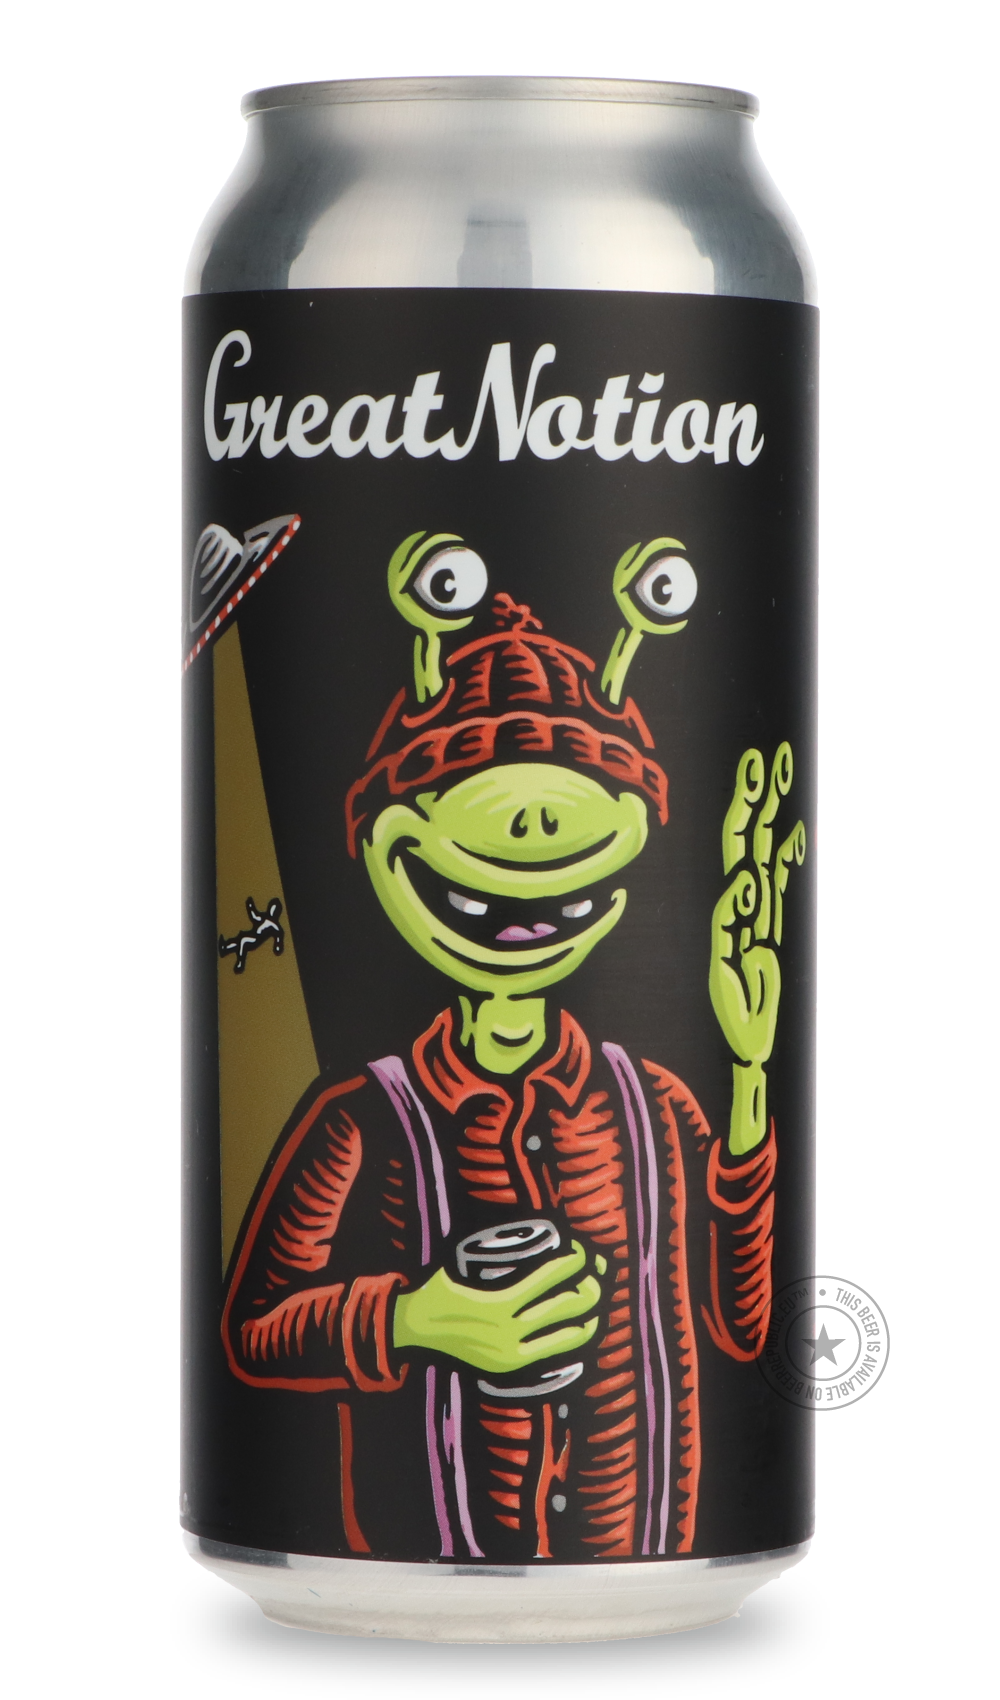 -Great Notion- Juice Invader-IPA- Only @ Beer Republic - The best online beer store for American & Canadian craft beer - Buy beer online from the USA and Canada - Bier online kopen - Amerikaans bier kopen - Craft beer store - Craft beer kopen - Amerikanisch bier kaufen - Bier online kaufen - Acheter biere online - IPA - Stout - Porter - New England IPA - Hazy IPA - Imperial Stout - Barrel Aged - Barrel Aged Imperial Stout - Brown - Dark beer - Blond - Blonde - Pilsner - Lager - Wheat - Weizen - Amber - Barl